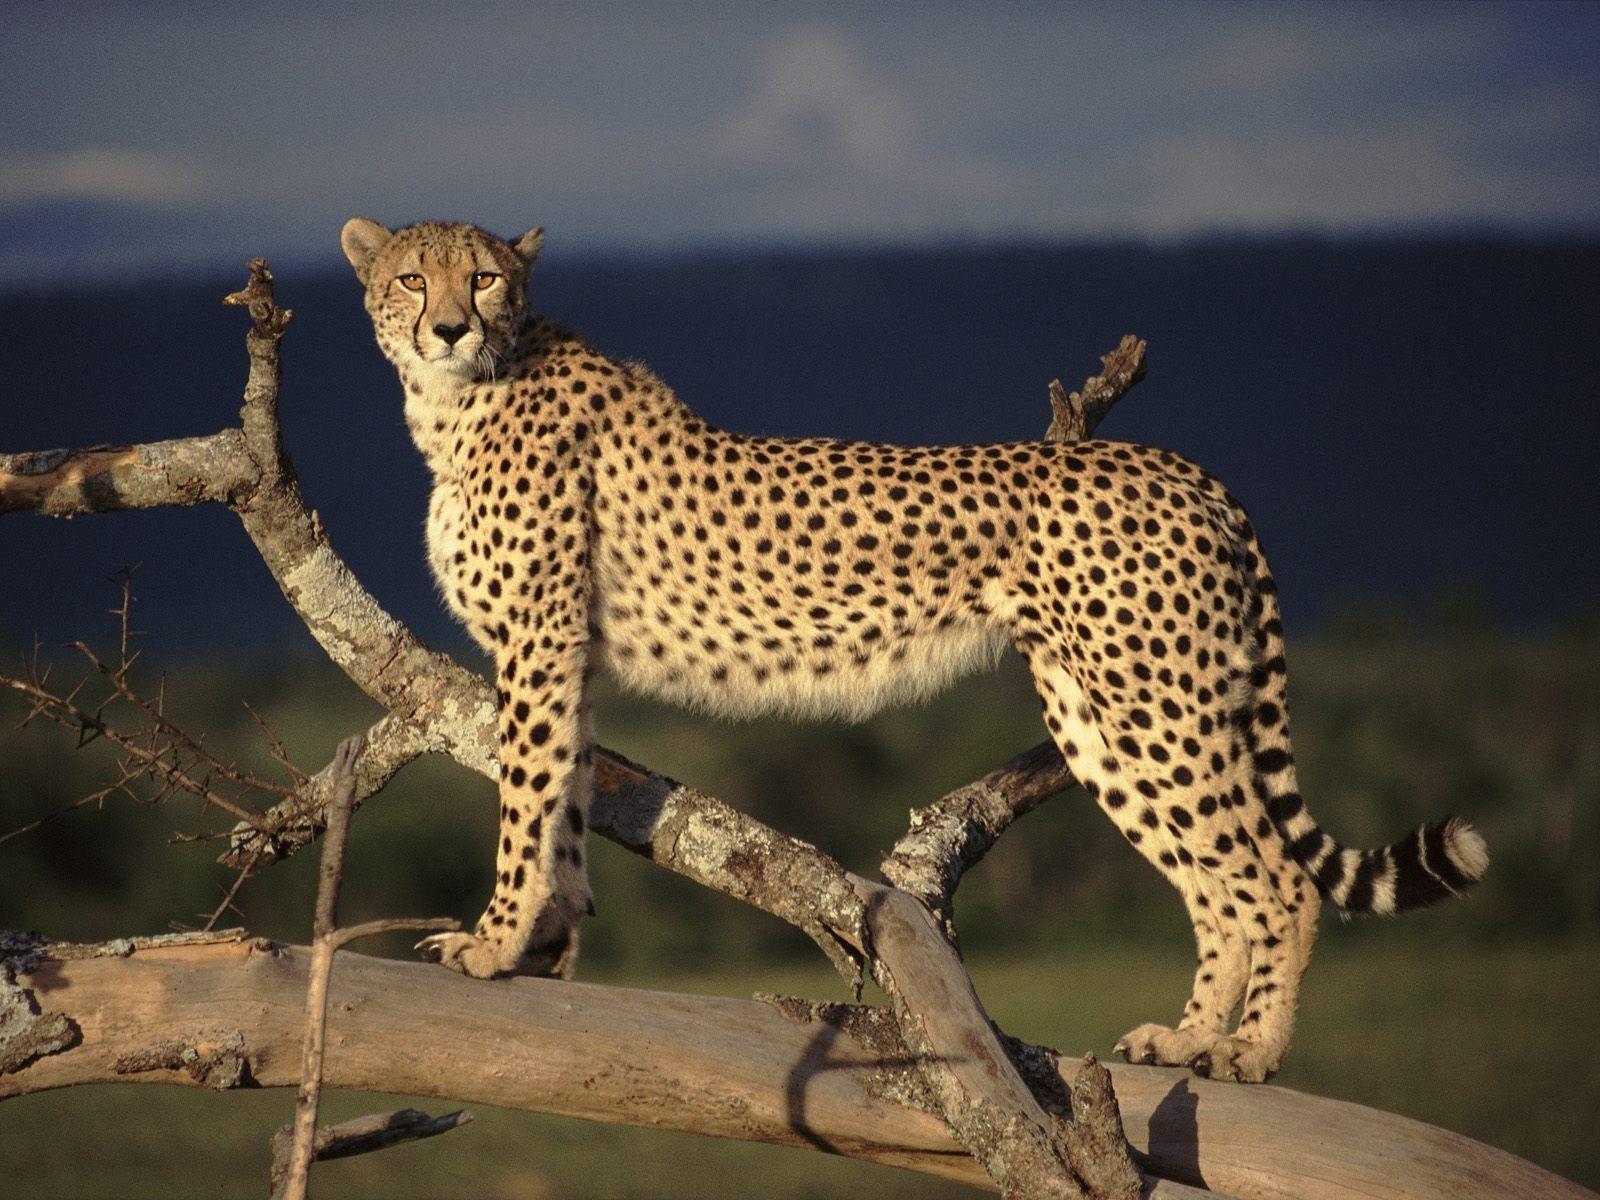 Female Cheetah on the Lookout Wallpaper Big Cats Animals